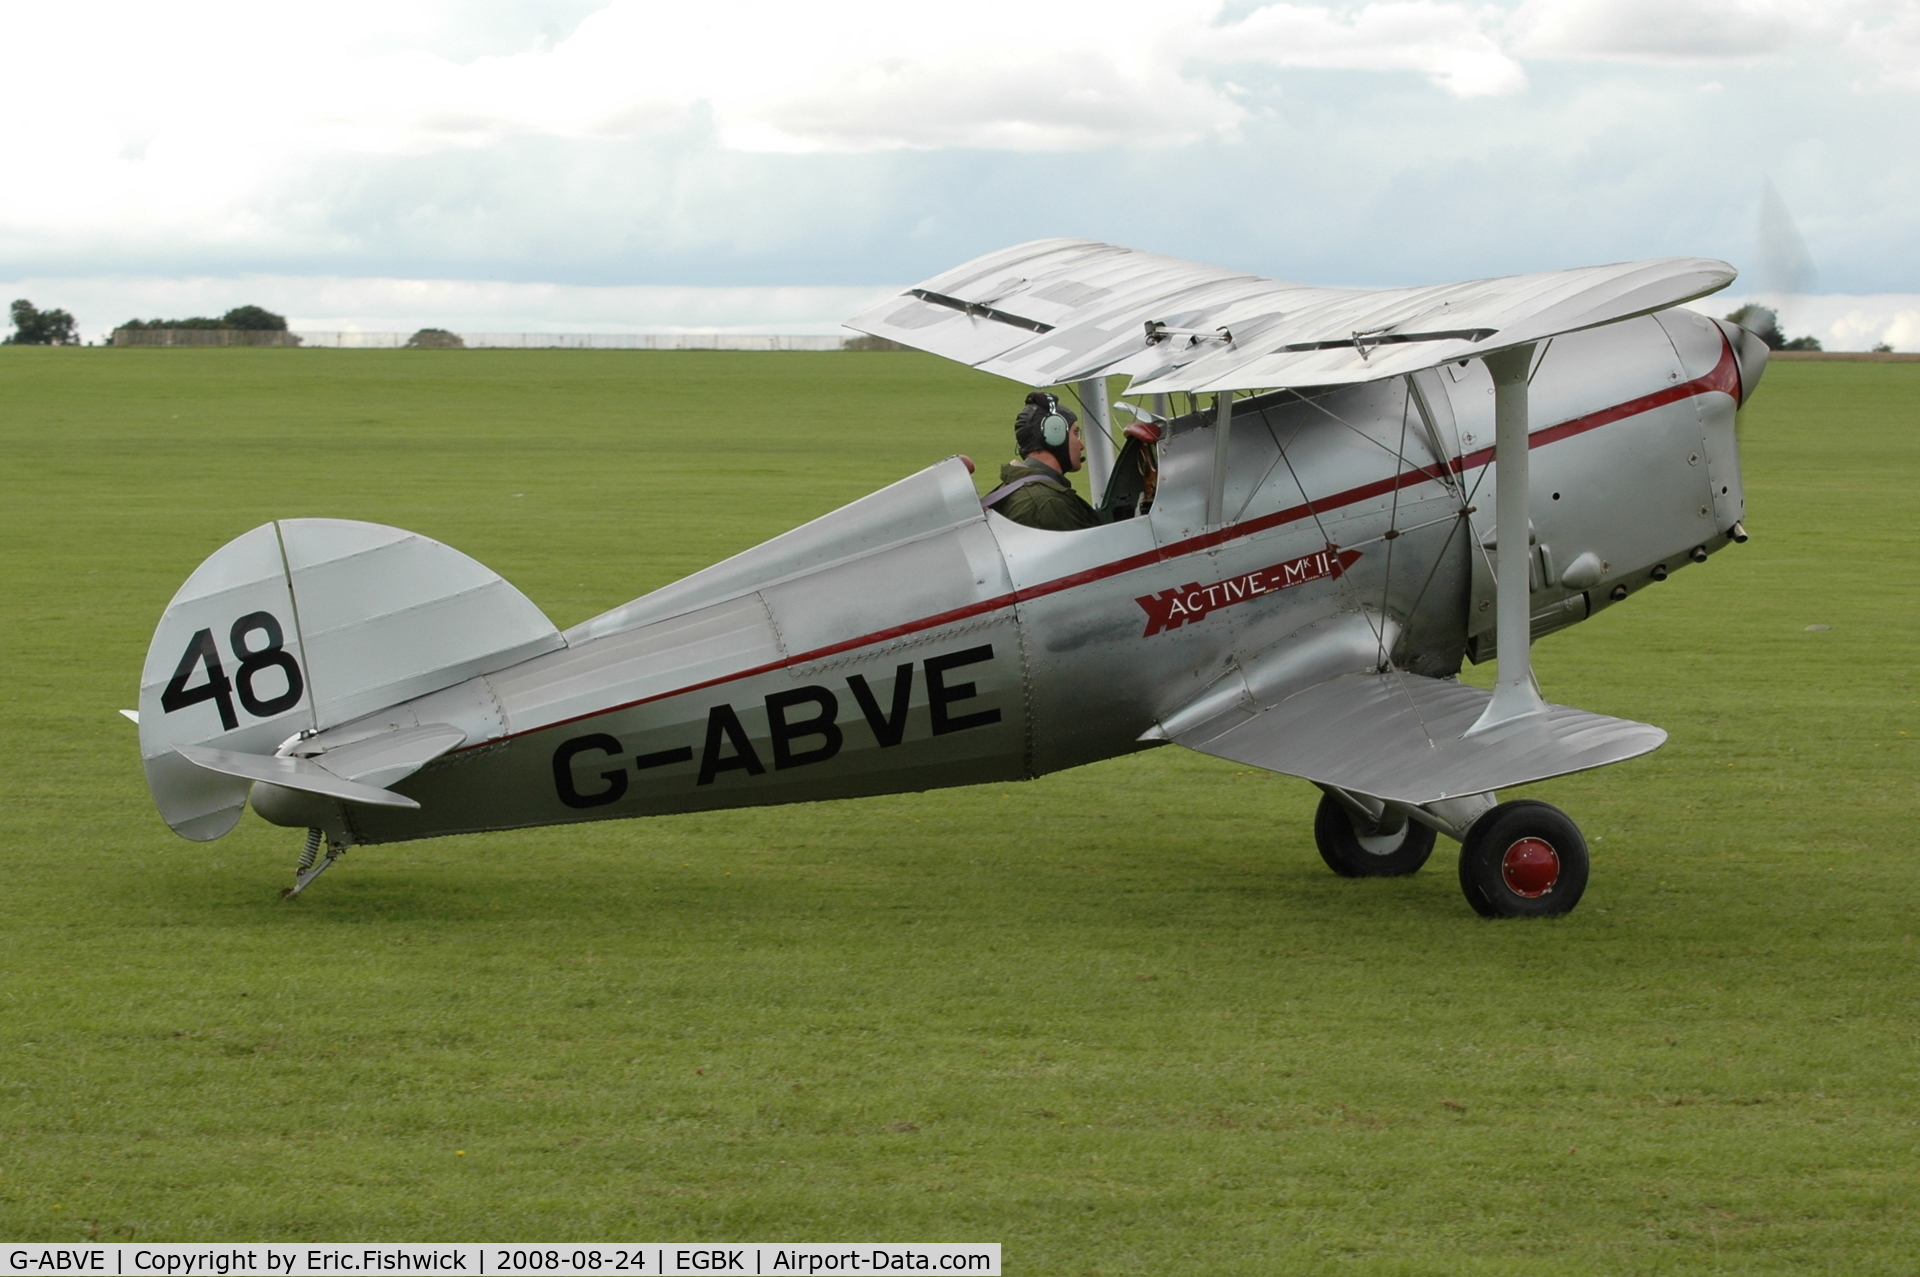 G-ABVE, 1932 Arrow Active 2 C/N 2, 2. G-ABVE at the Sywell Airshow 24 Aug 2008